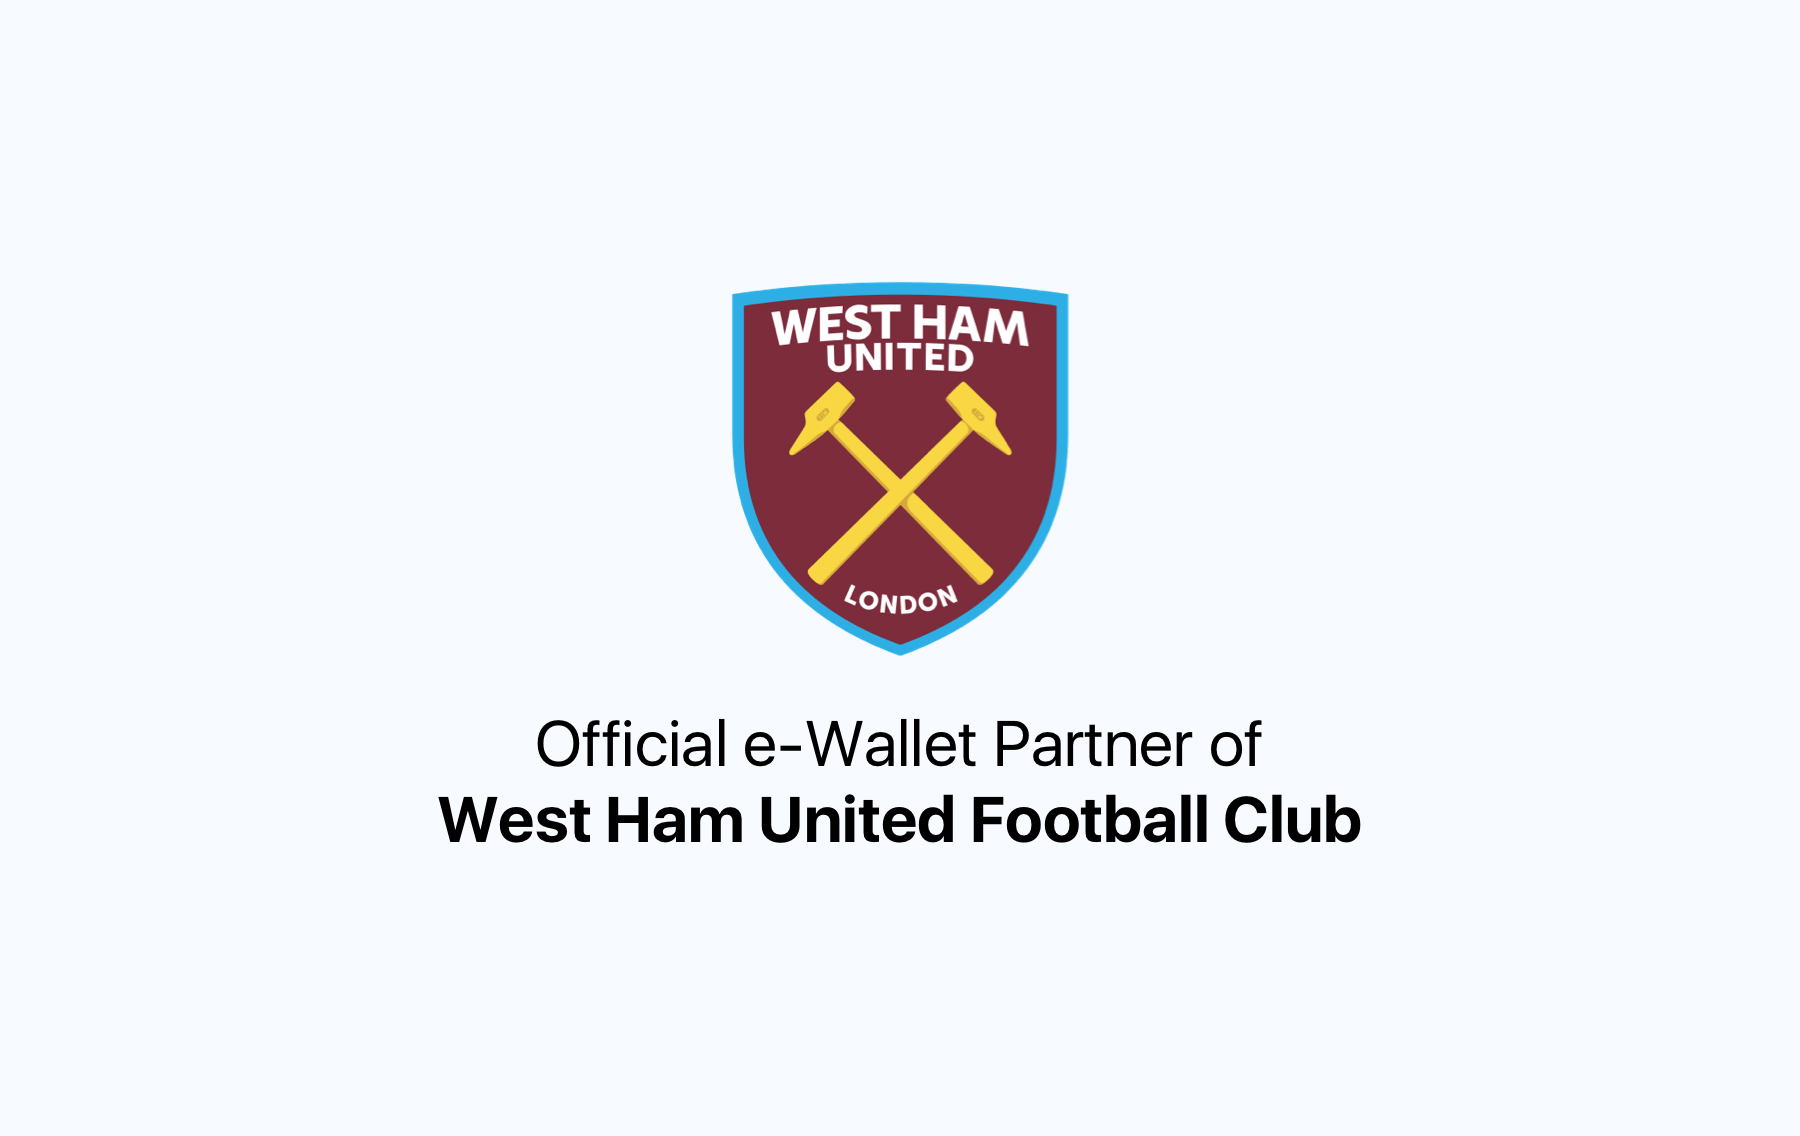 Jeton Wallet has become the Official e-Wallet Partner of West Ham United Football Club